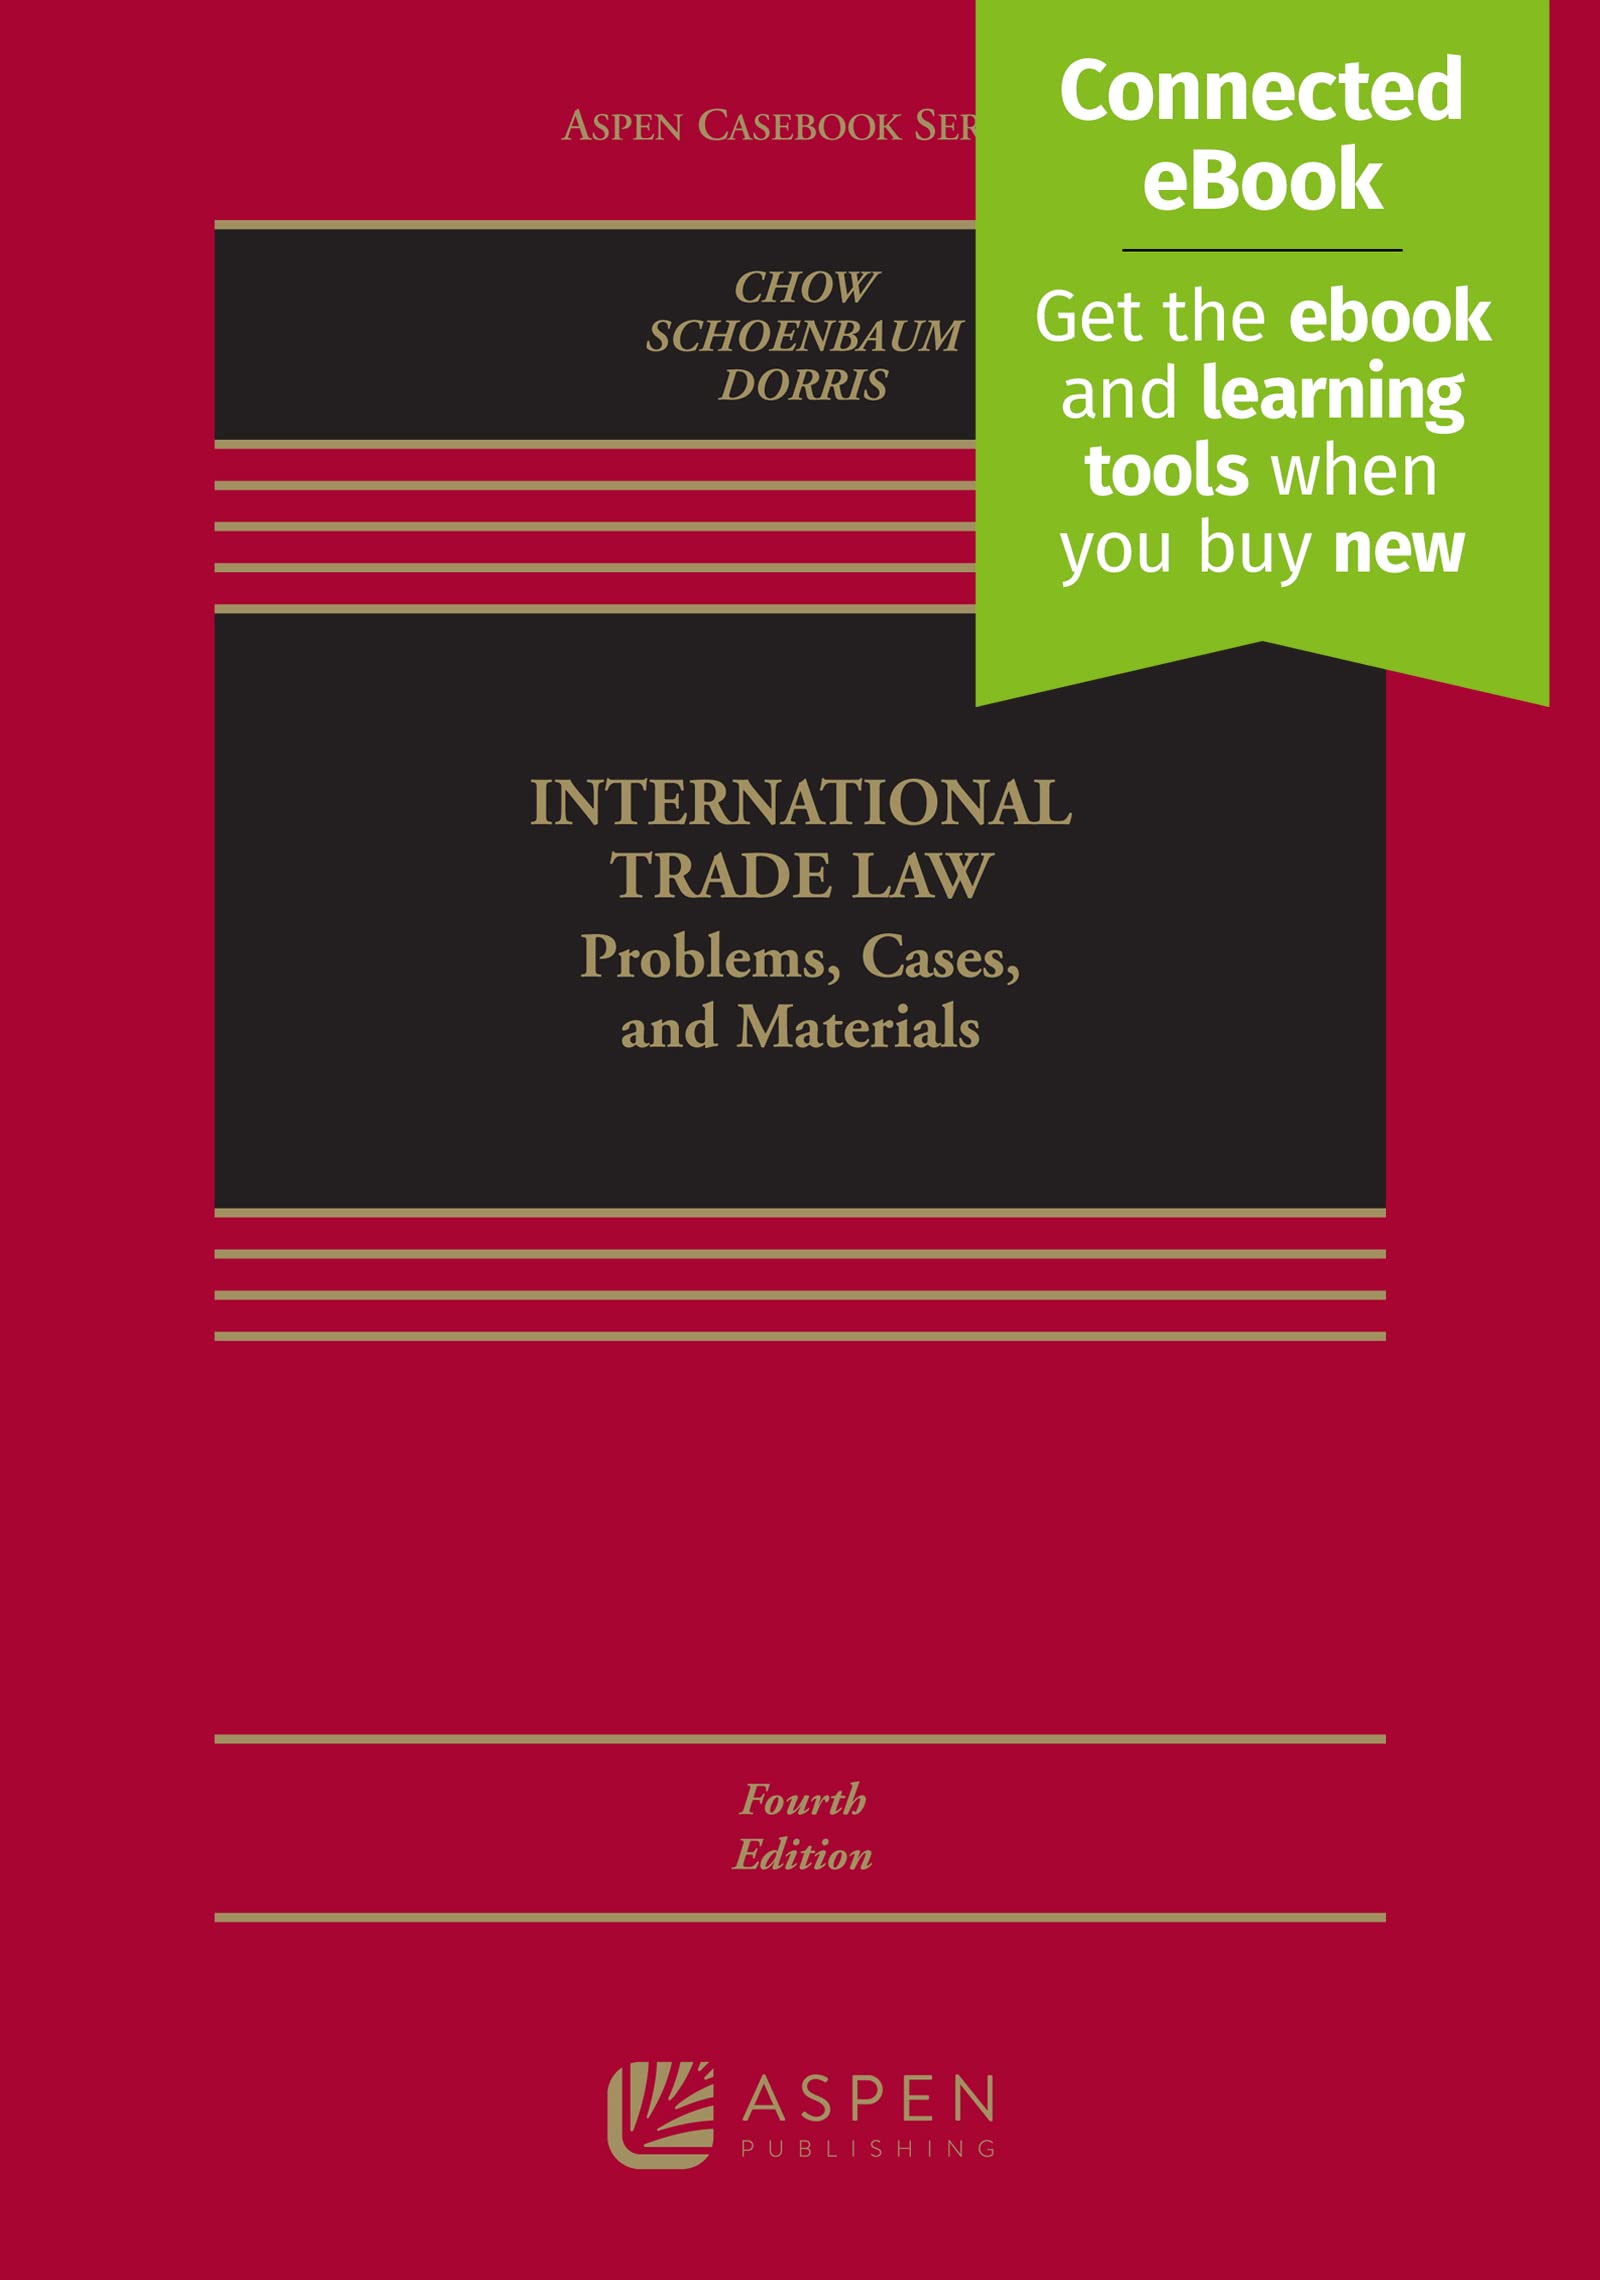 International Trade Law Problems, Cases, and Materials (Aspen Casebook) 4th Edition by Daniel C. K. Chow